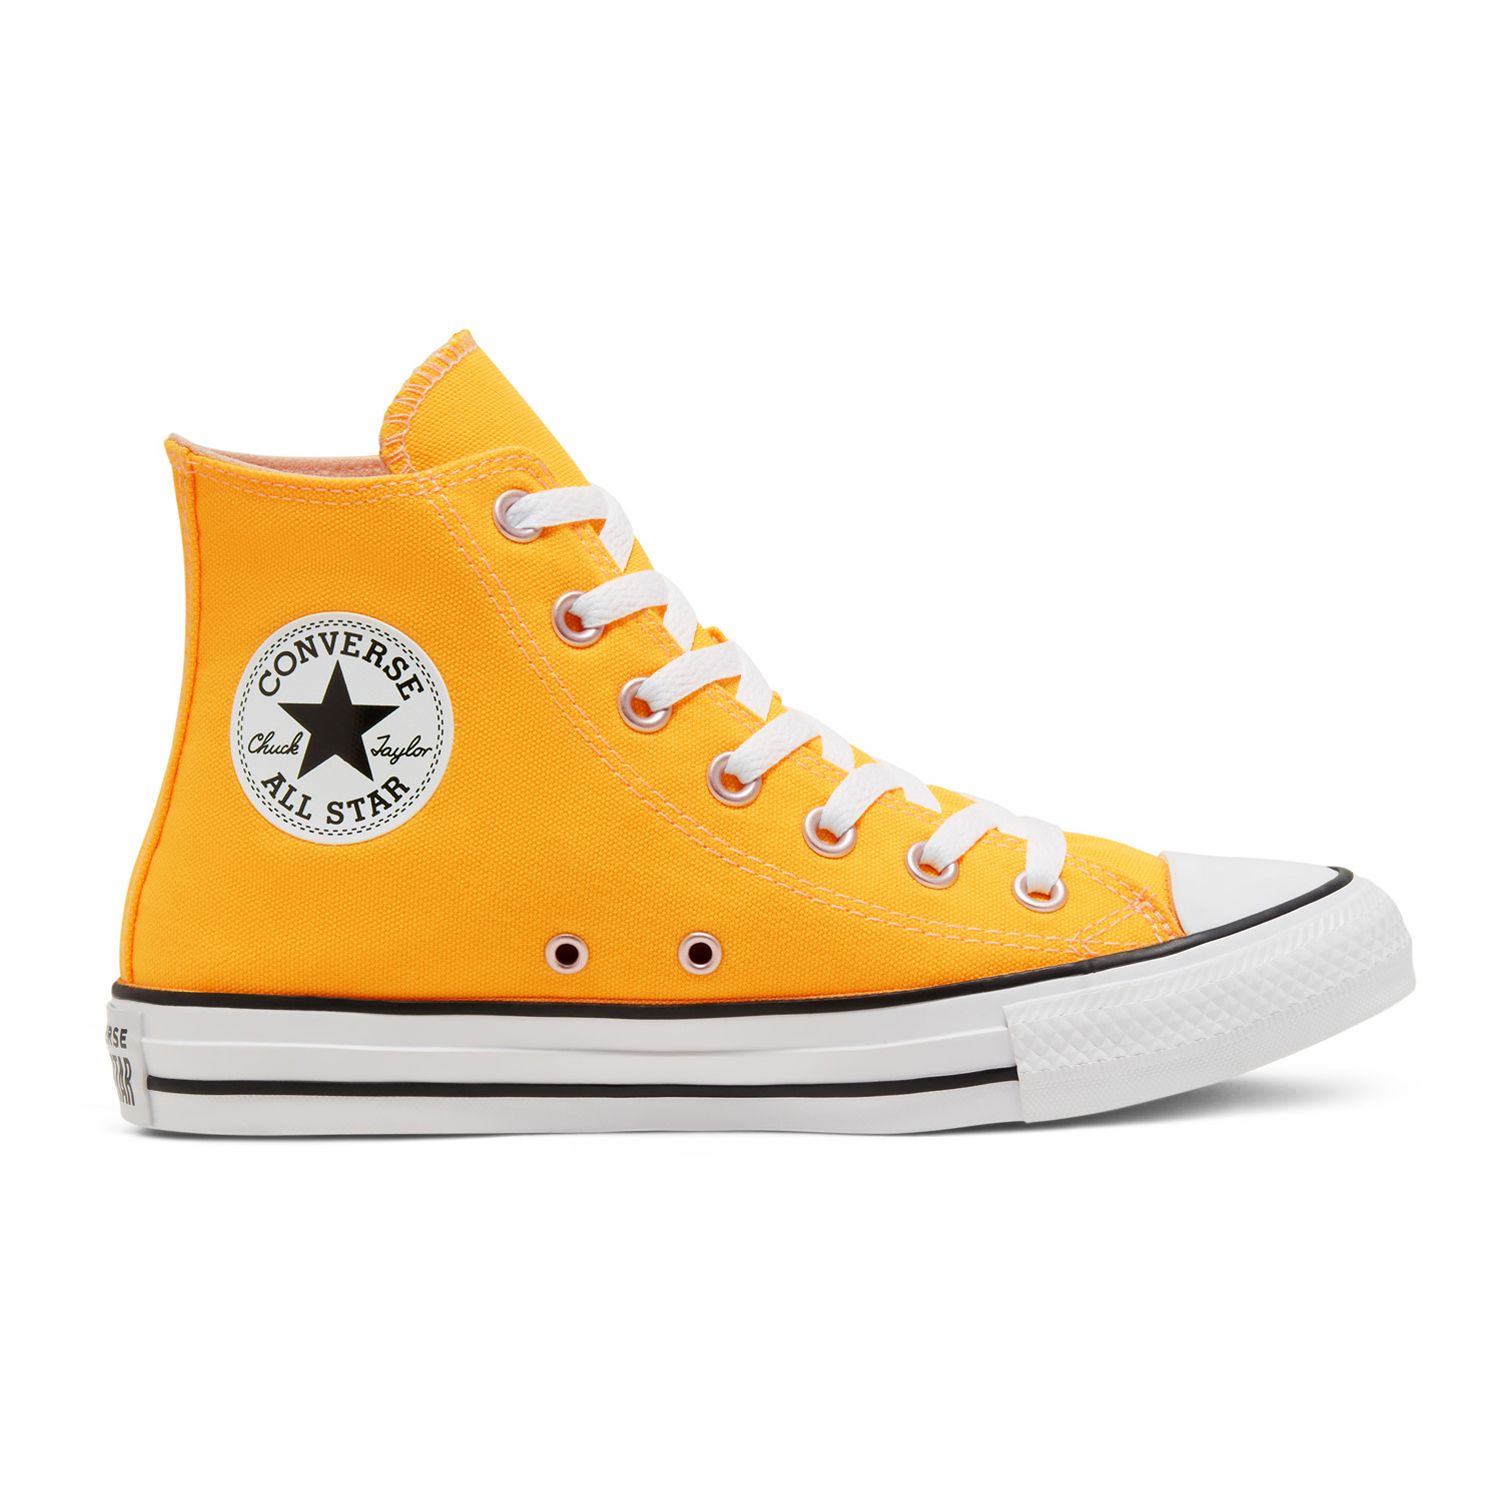 all star yellow